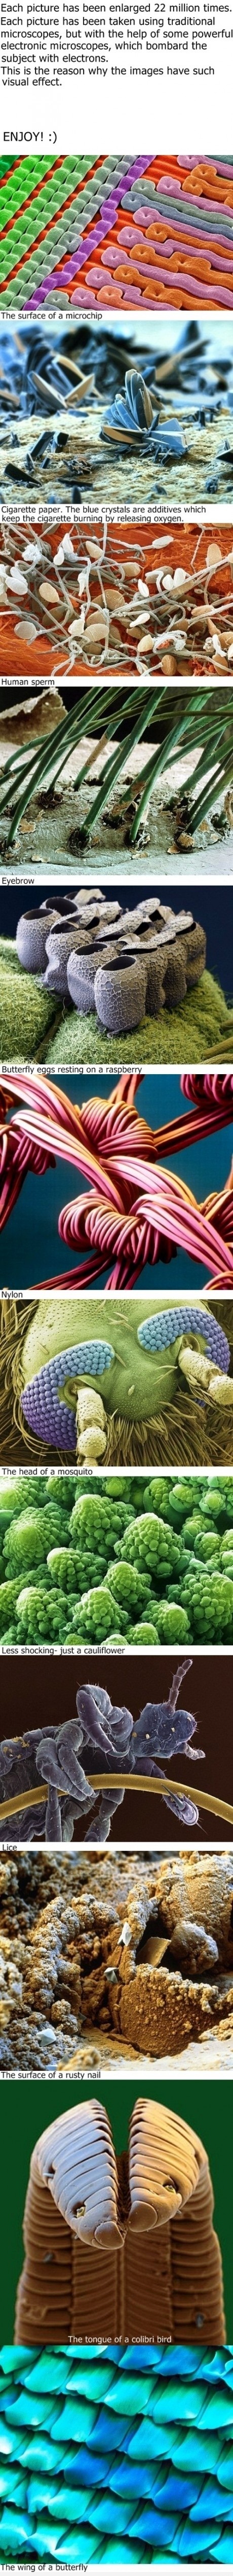 Things Under A Microscope